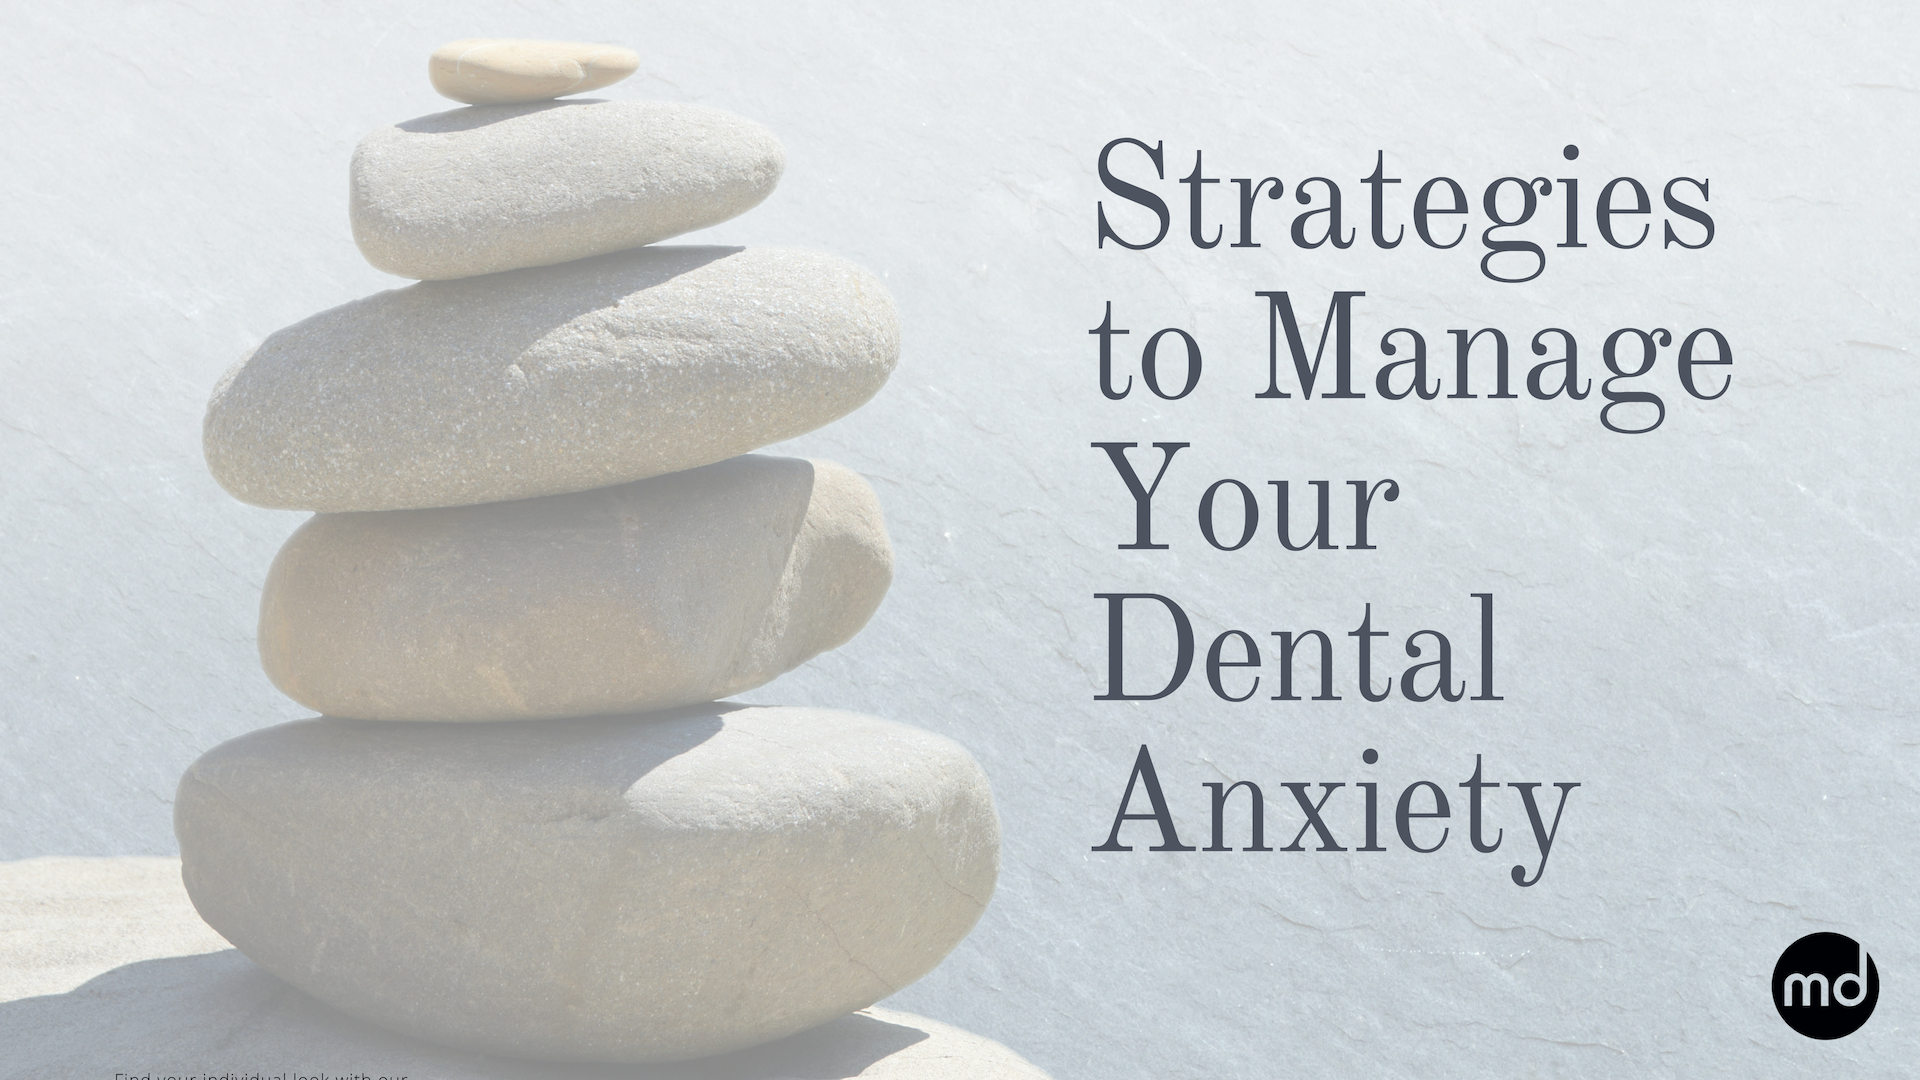 Strategies to Manage Your Dental Anxiety